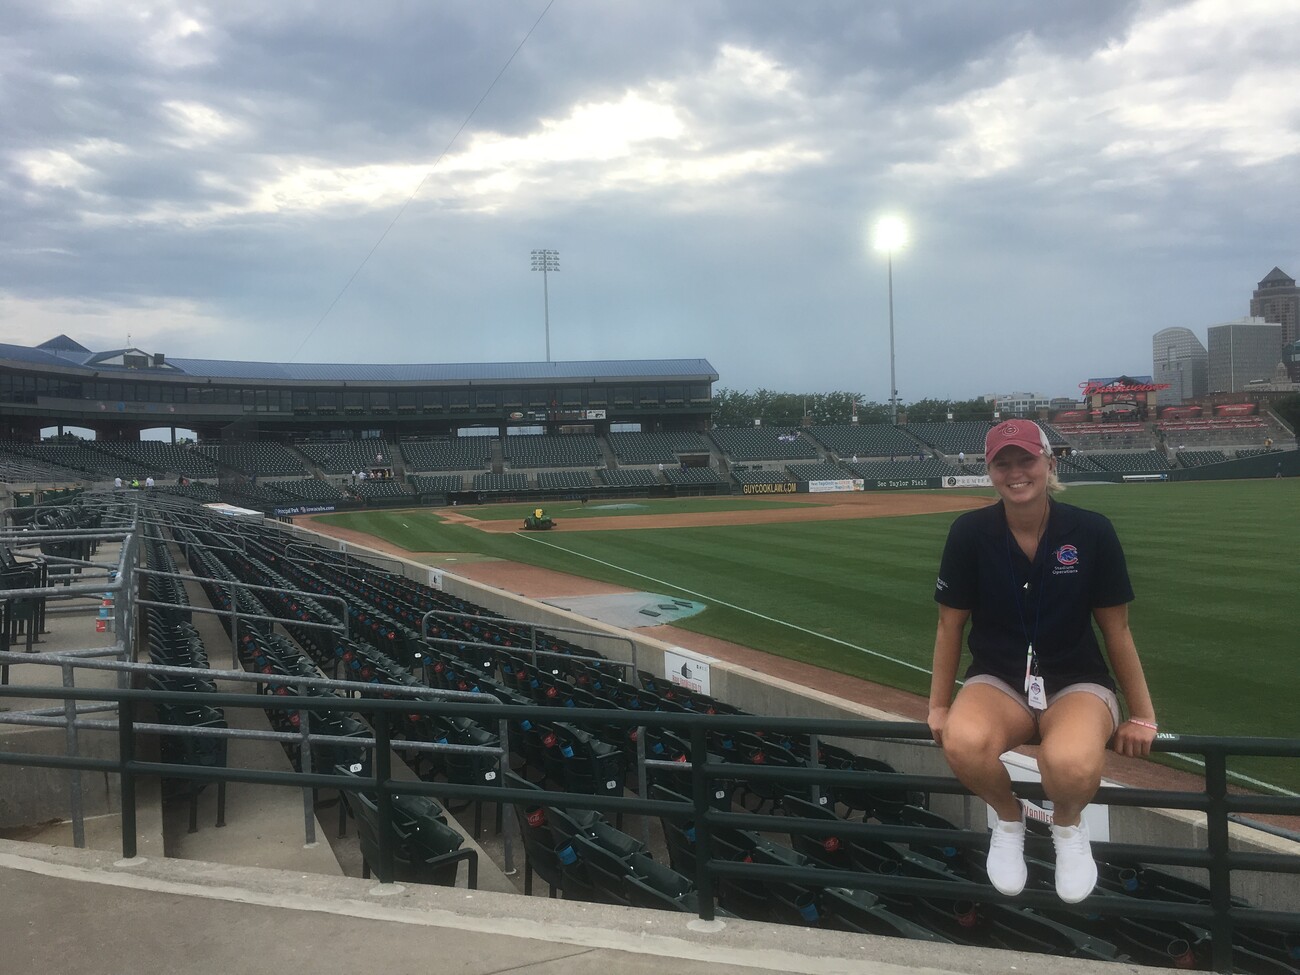 Internship Matches Sports Management Major With Her Love of the Game